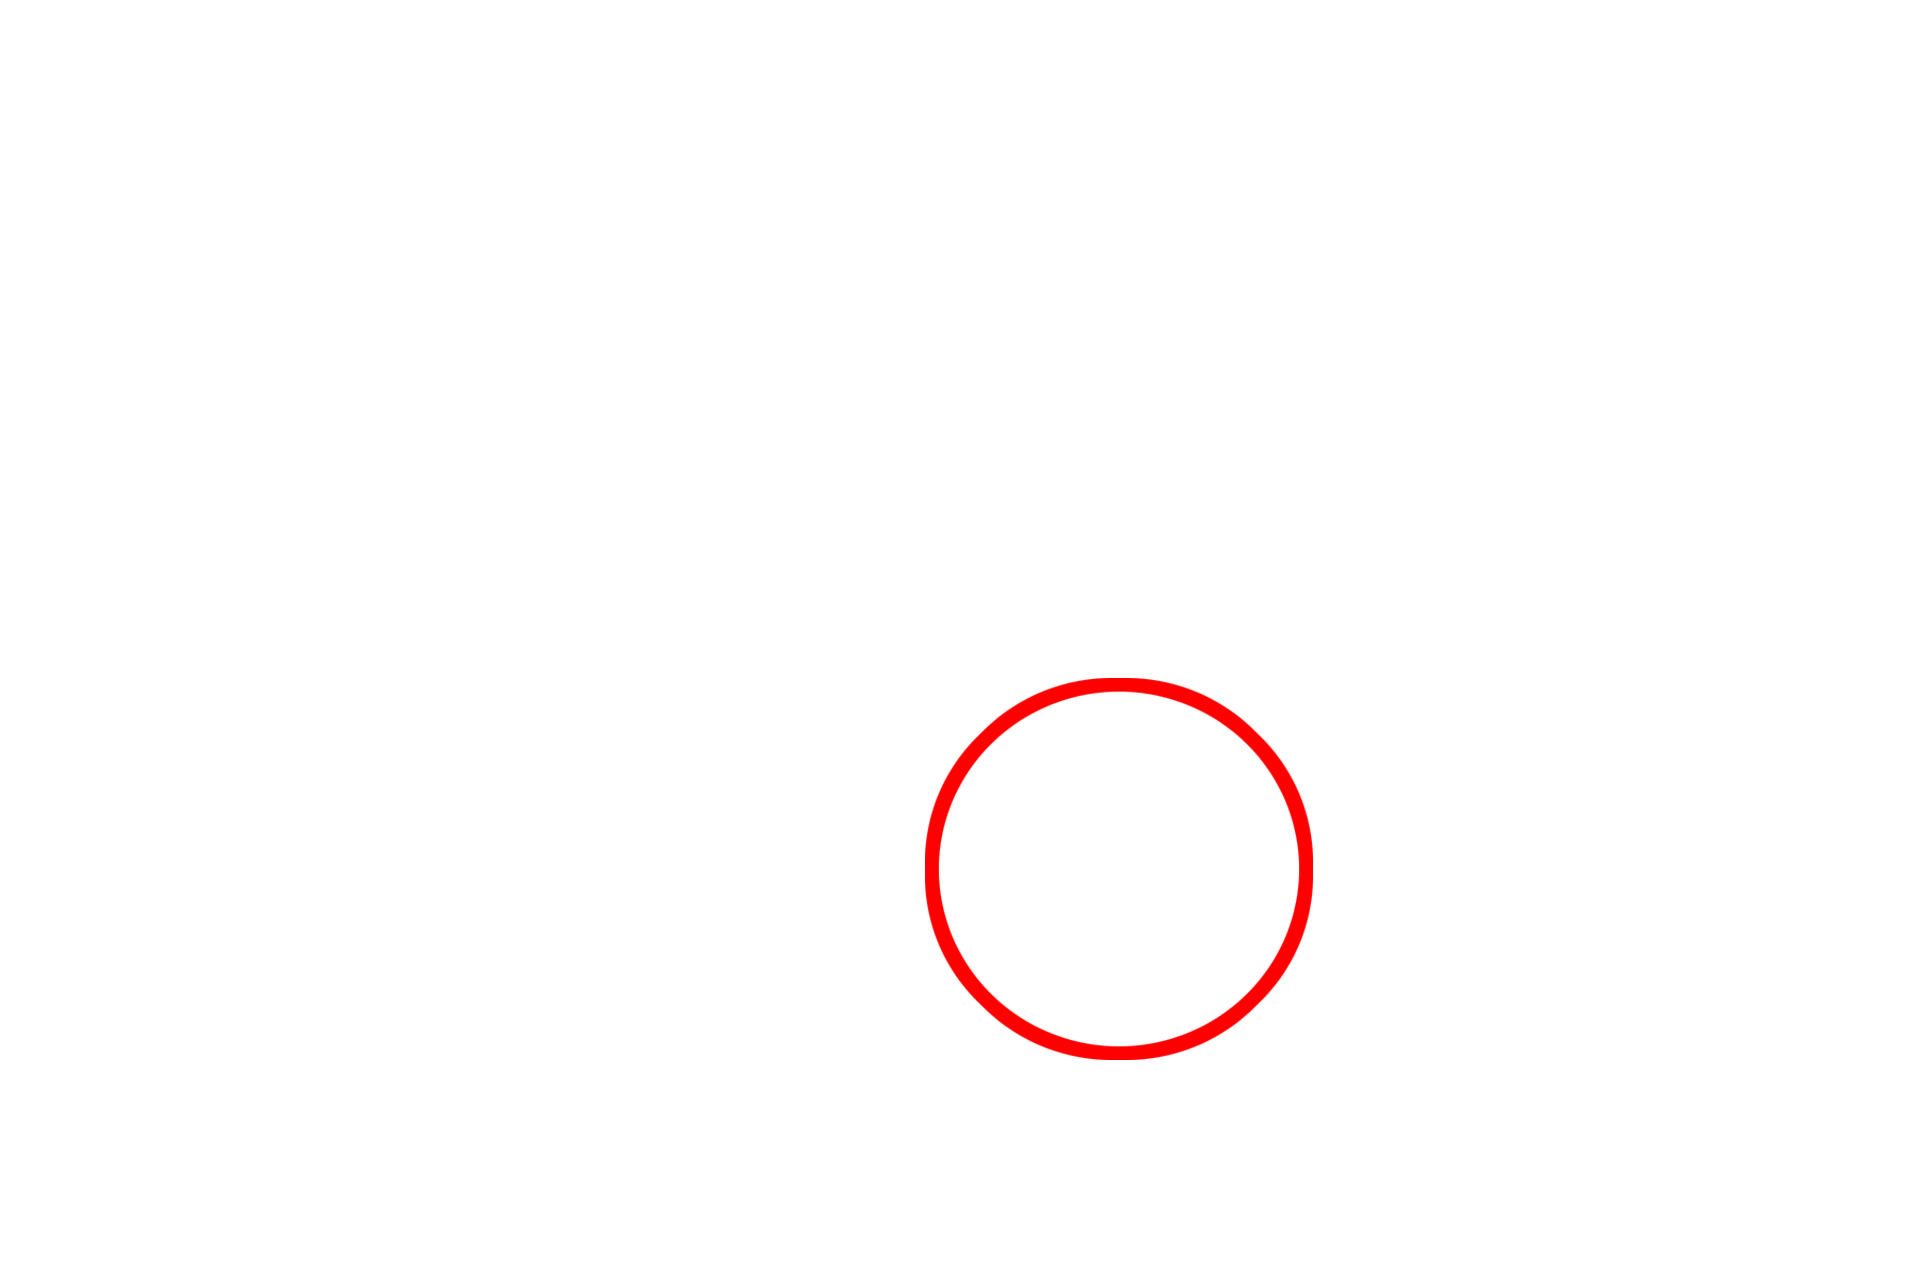 Nucleus <p>The nucleus is usually the most prominent structure in the cell and, in non-dividing cells, the nucleus is well demarcated from the cytoplasm by the nuclear envelope.  The nucleus houses the genomic DNA, transcribes and processes messenger RNA and contains the nucleolus, the site of ribosomal RNA production and the initial assembly of ribosomes.</p>
